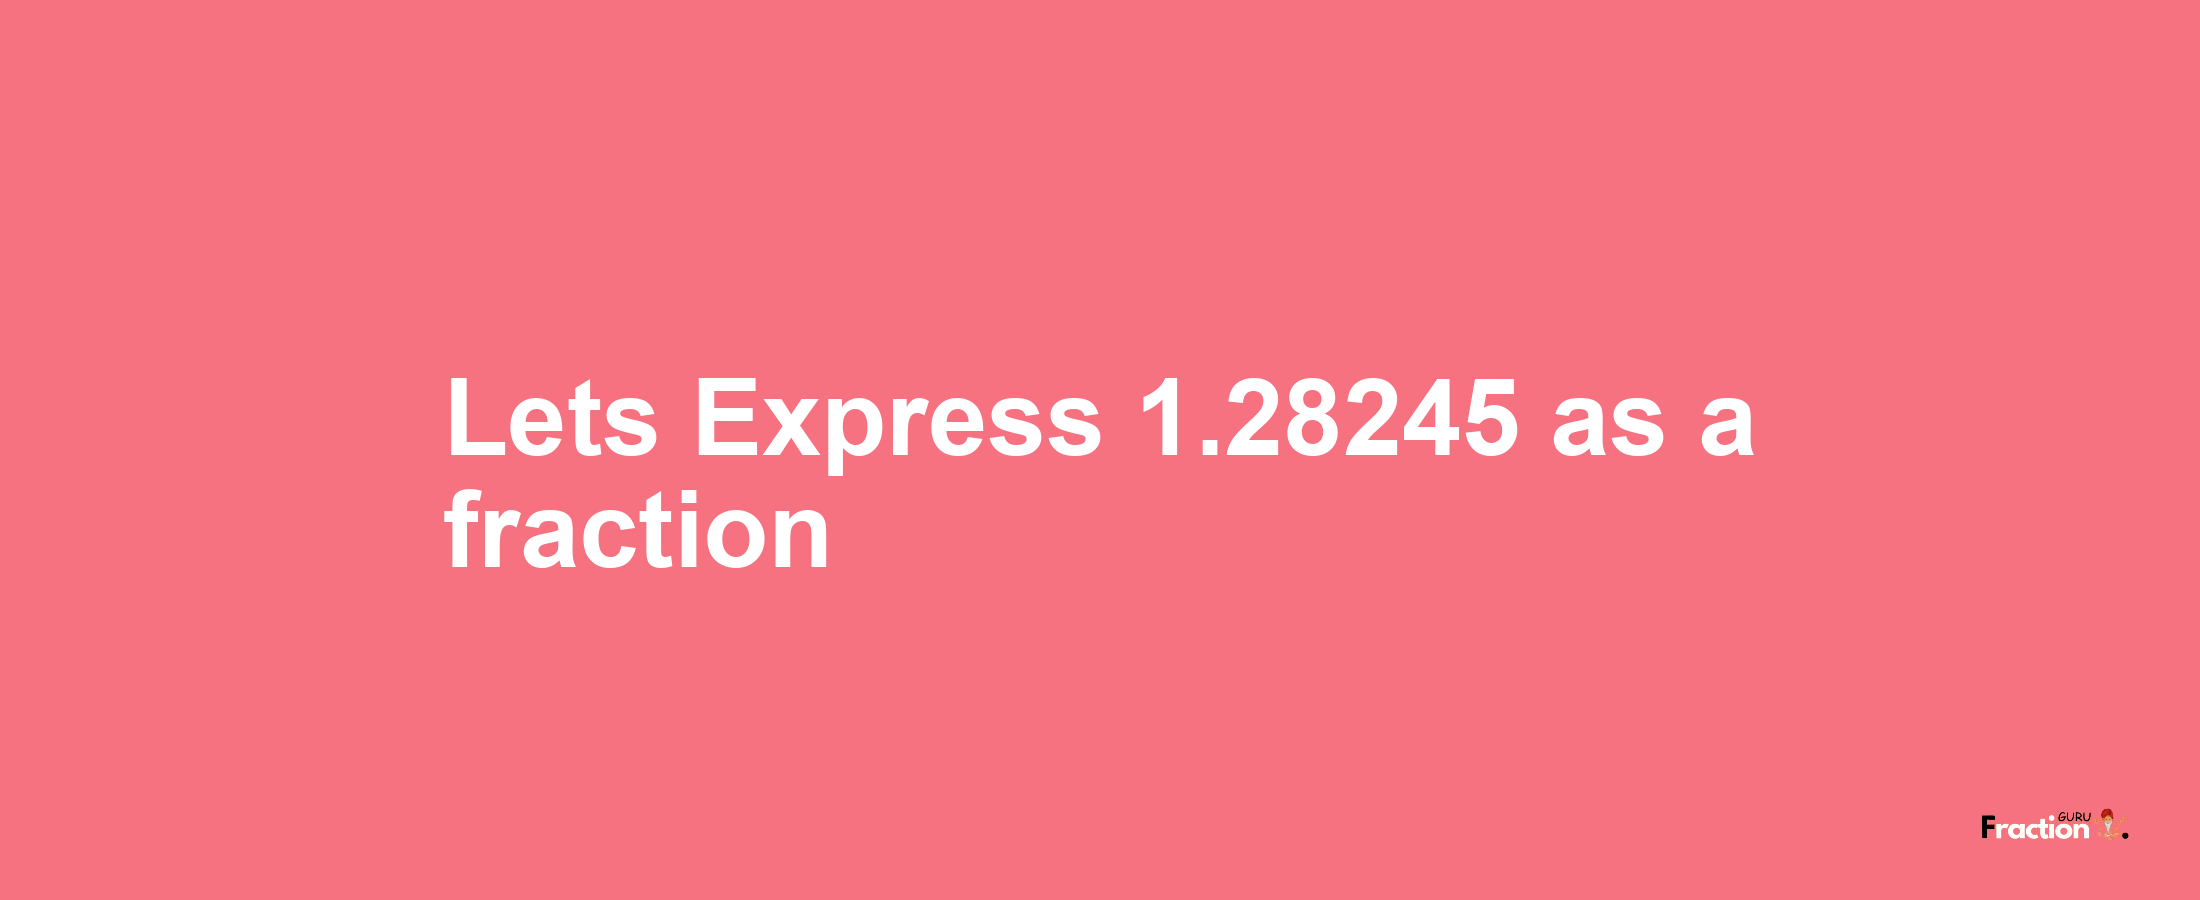 Lets Express 1.28245 as afraction